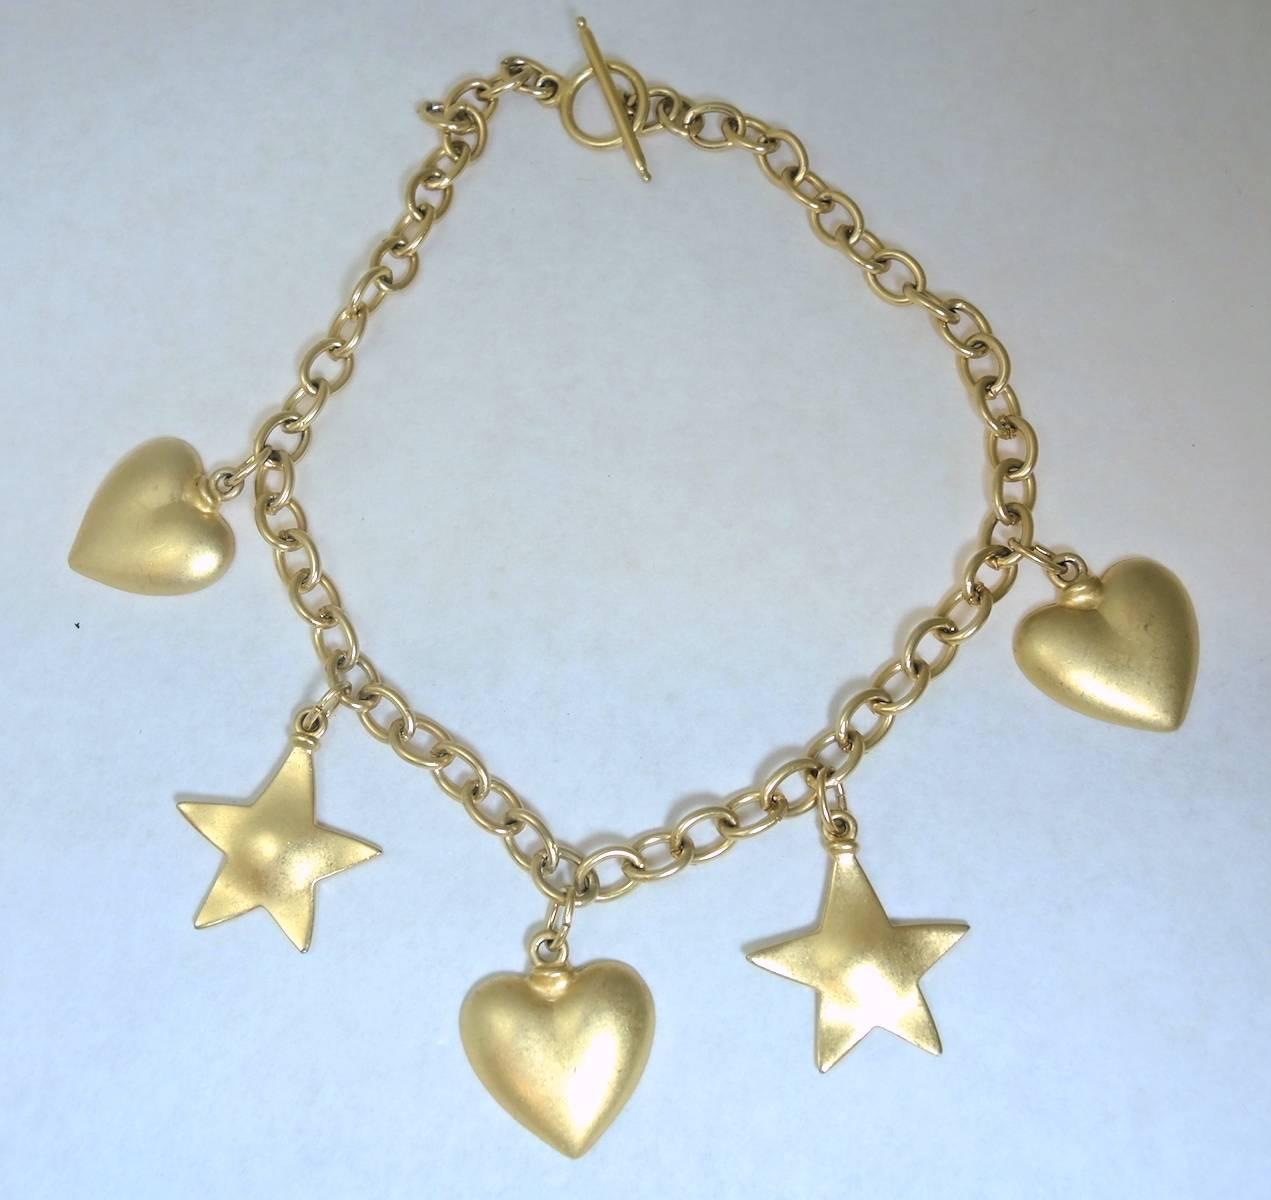 This is not signed but it makes me think immediately of Robert Lee Morris.  This very fun necklace has alternating hearts and stars that add up to five charms. These large sized charms dangle from a gold tone link chain. It has a toggle closure and